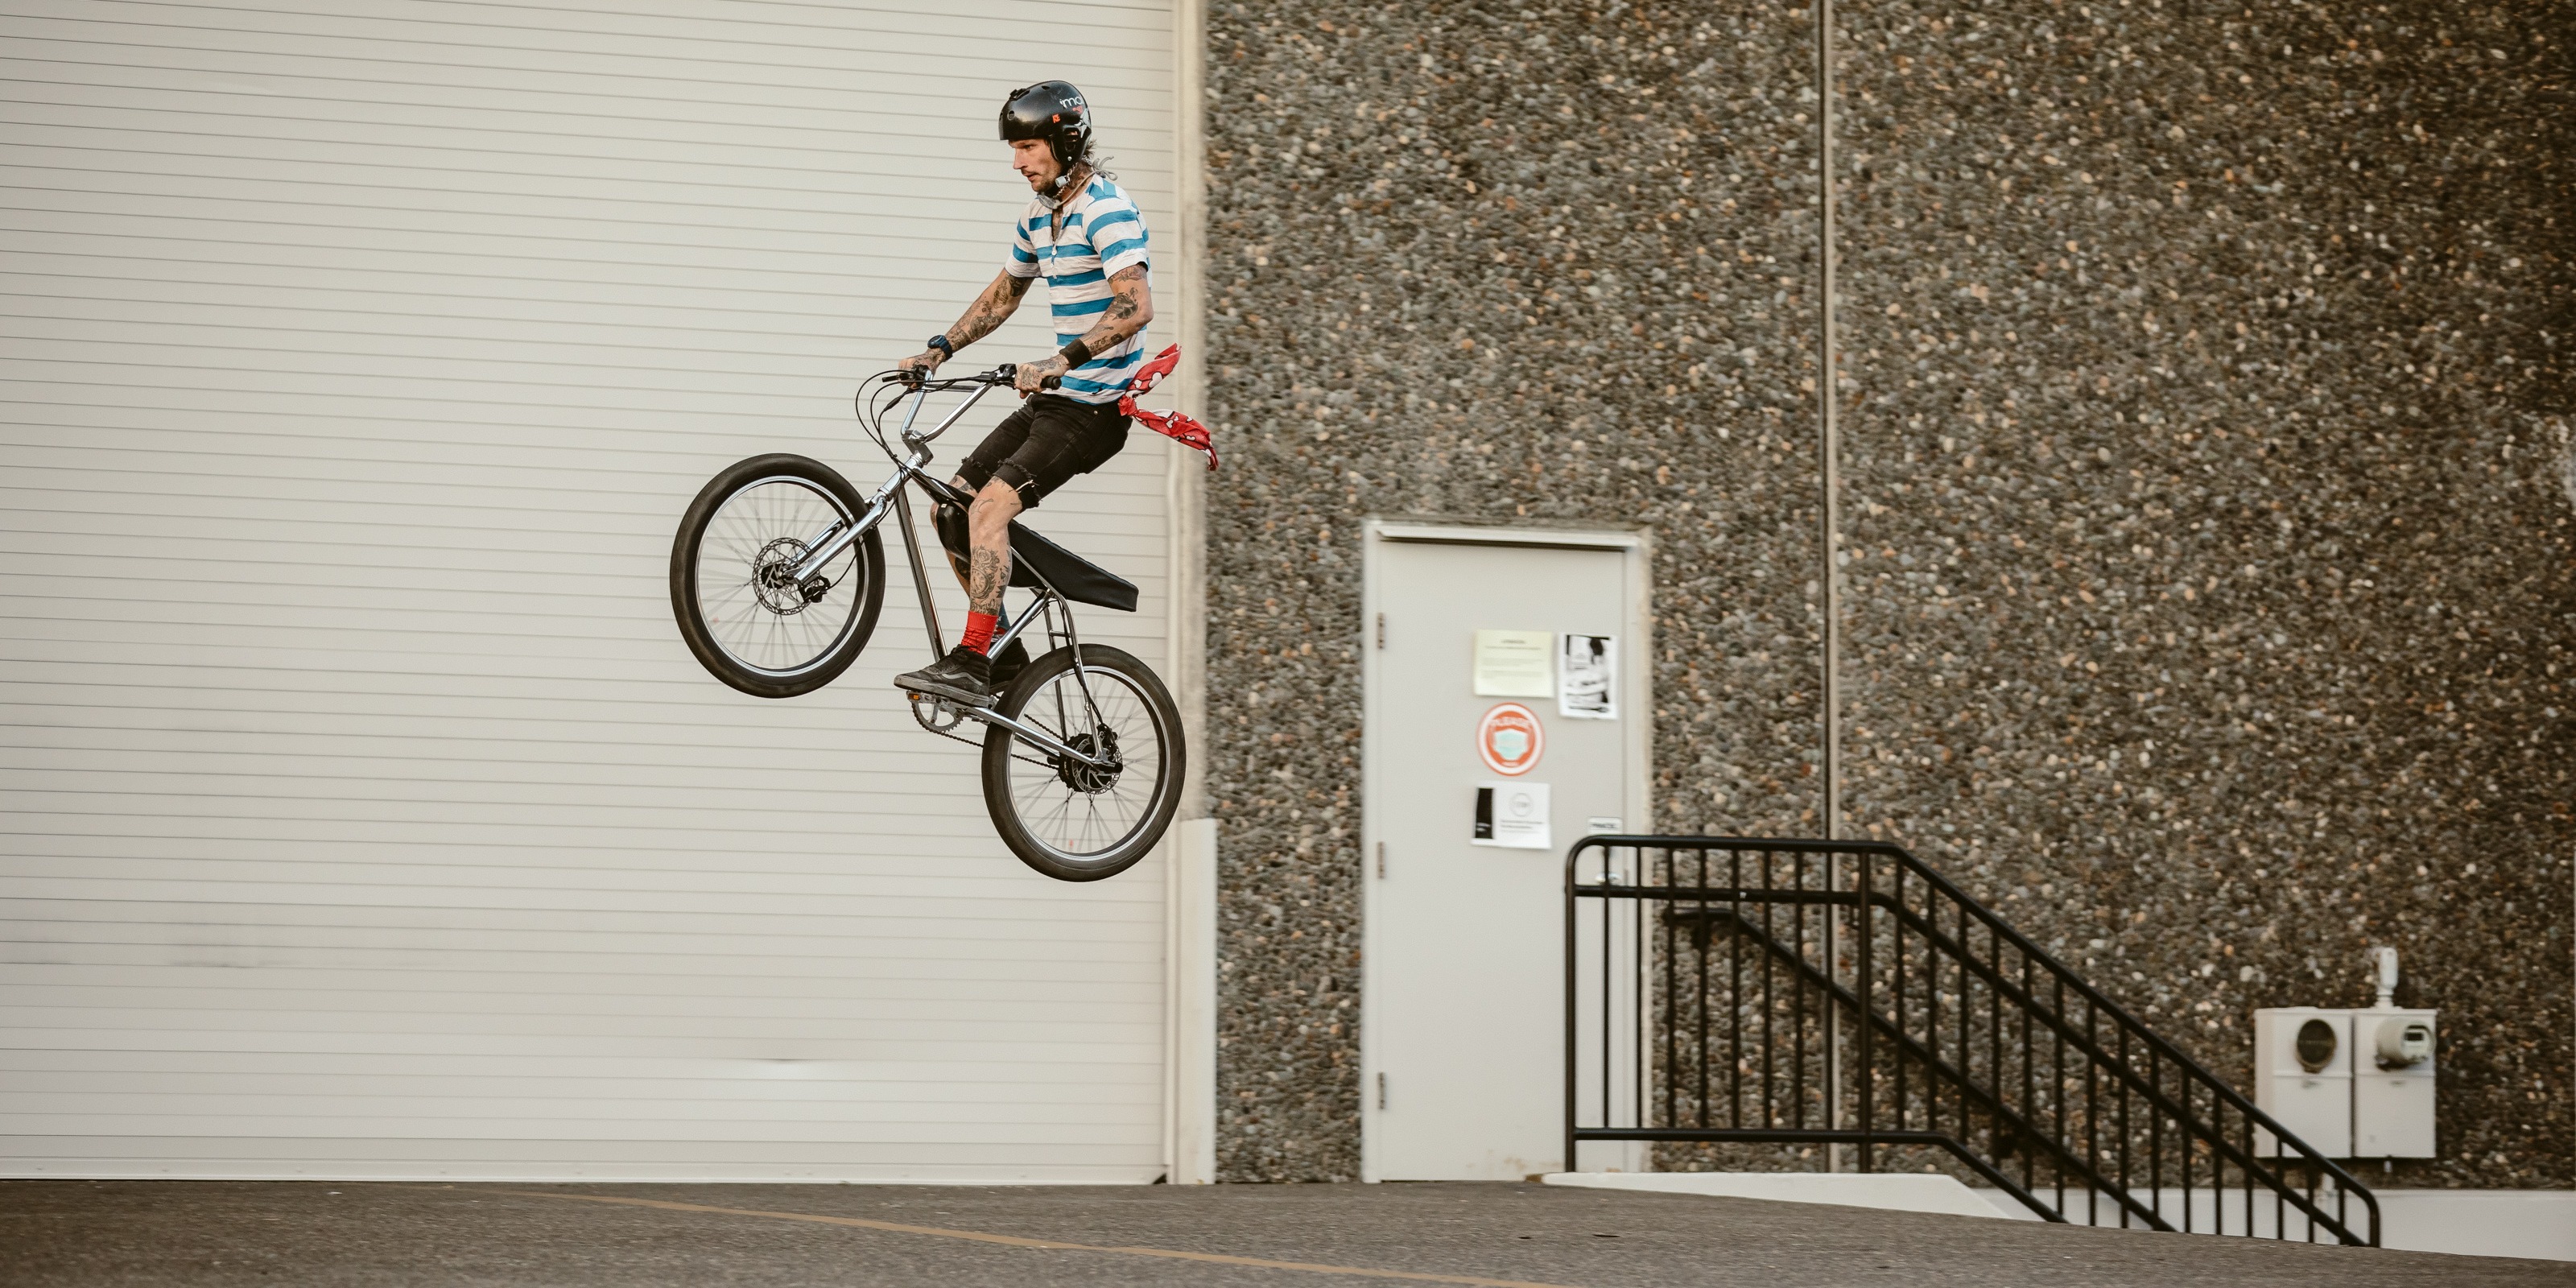 Hectares lightly Berry Zooz launches three new shiny BMX-styled e-bikes up to 27 MPH speeds